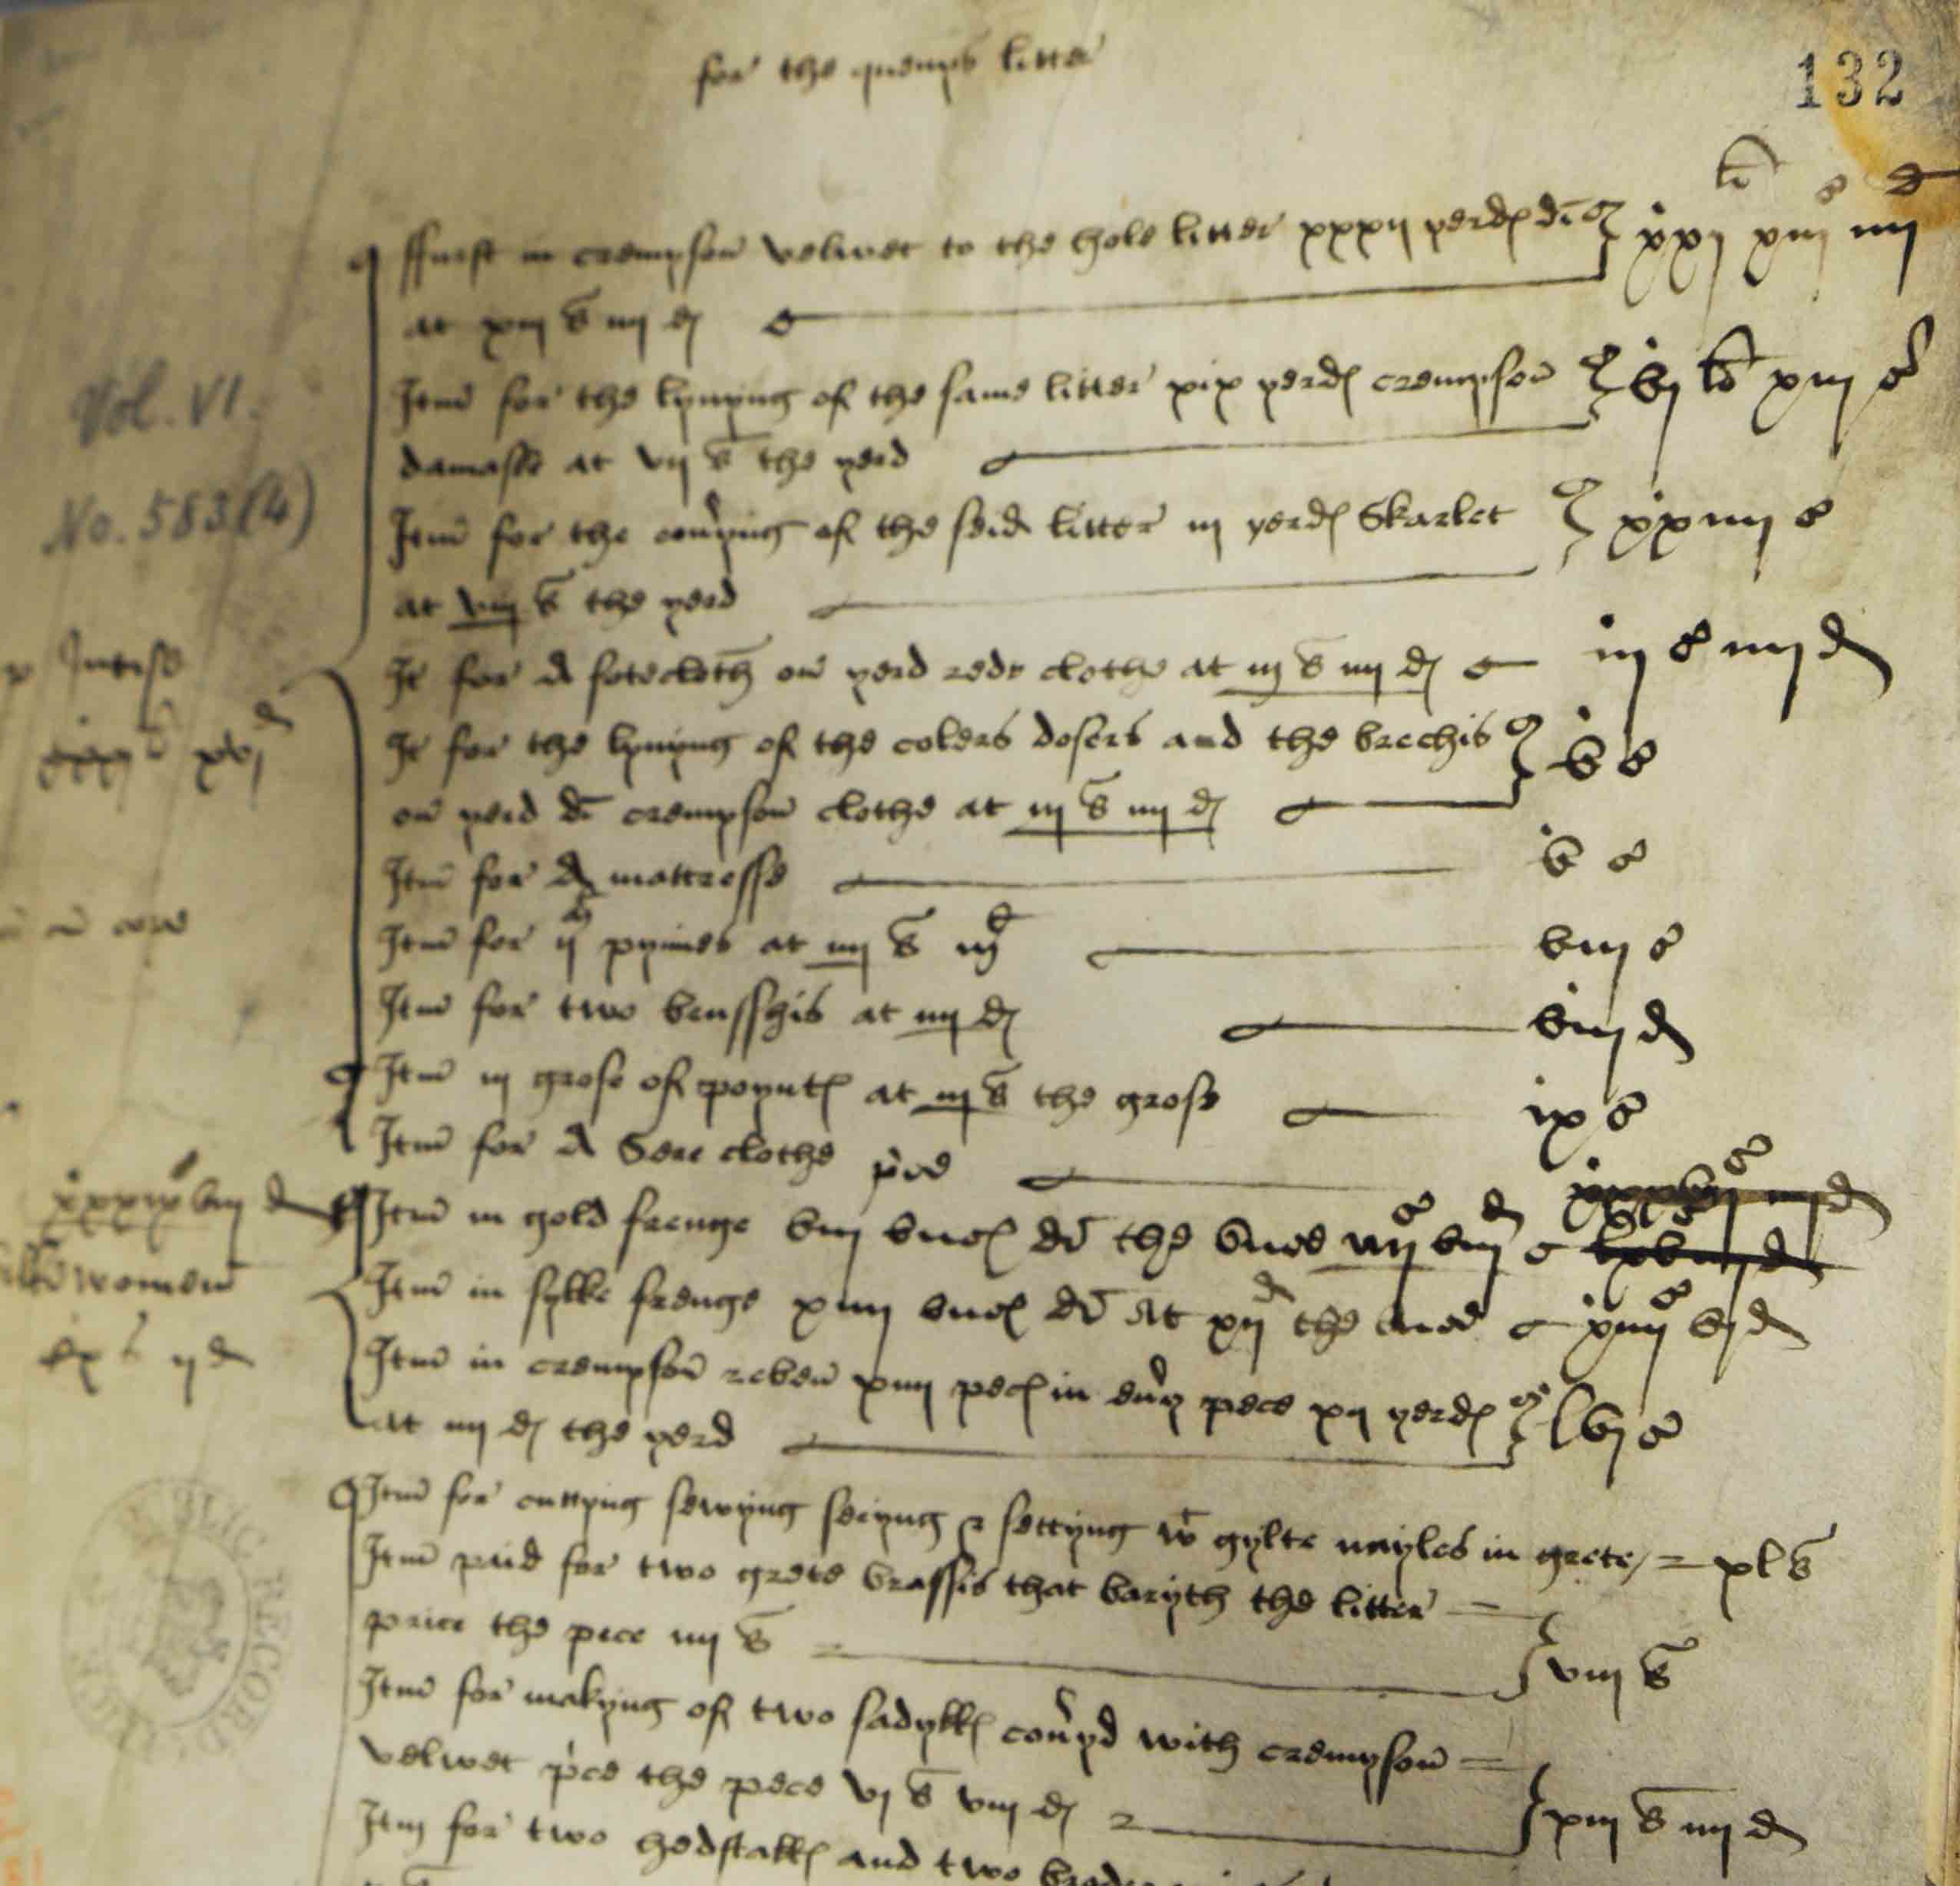 List of the materials for Anne Boleyn's coronation litter and horses (SP 1/76, f.132).